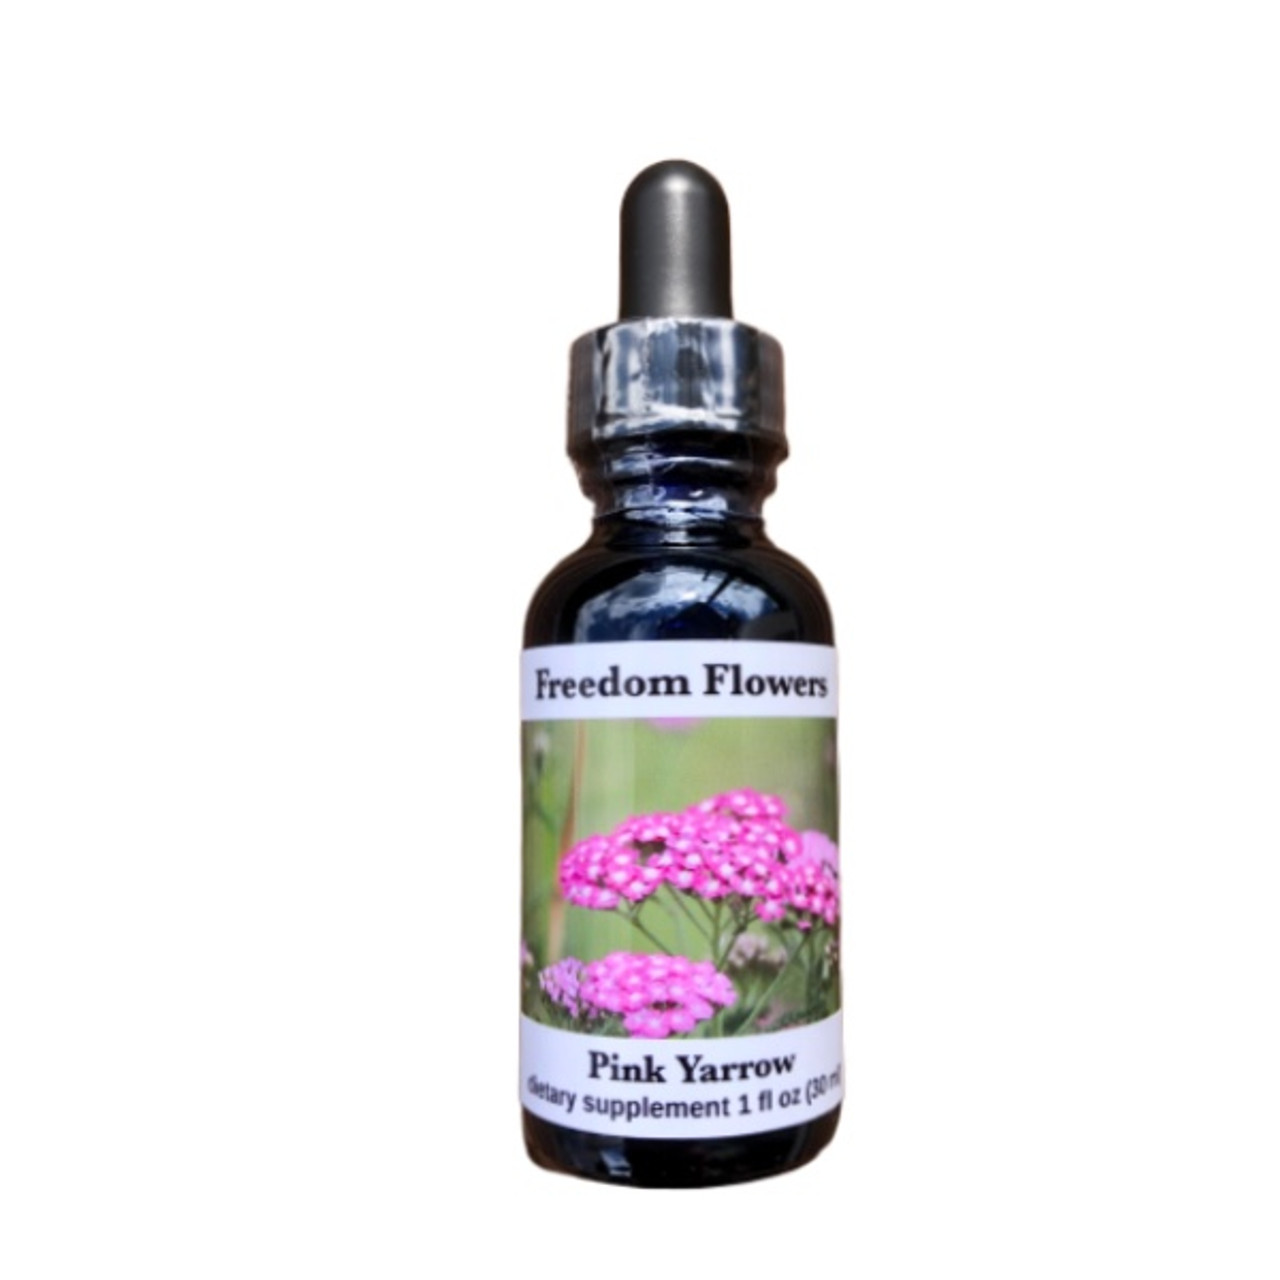 Pink Yarrow Flower Essence: Protection for the Heart - Wild Rose